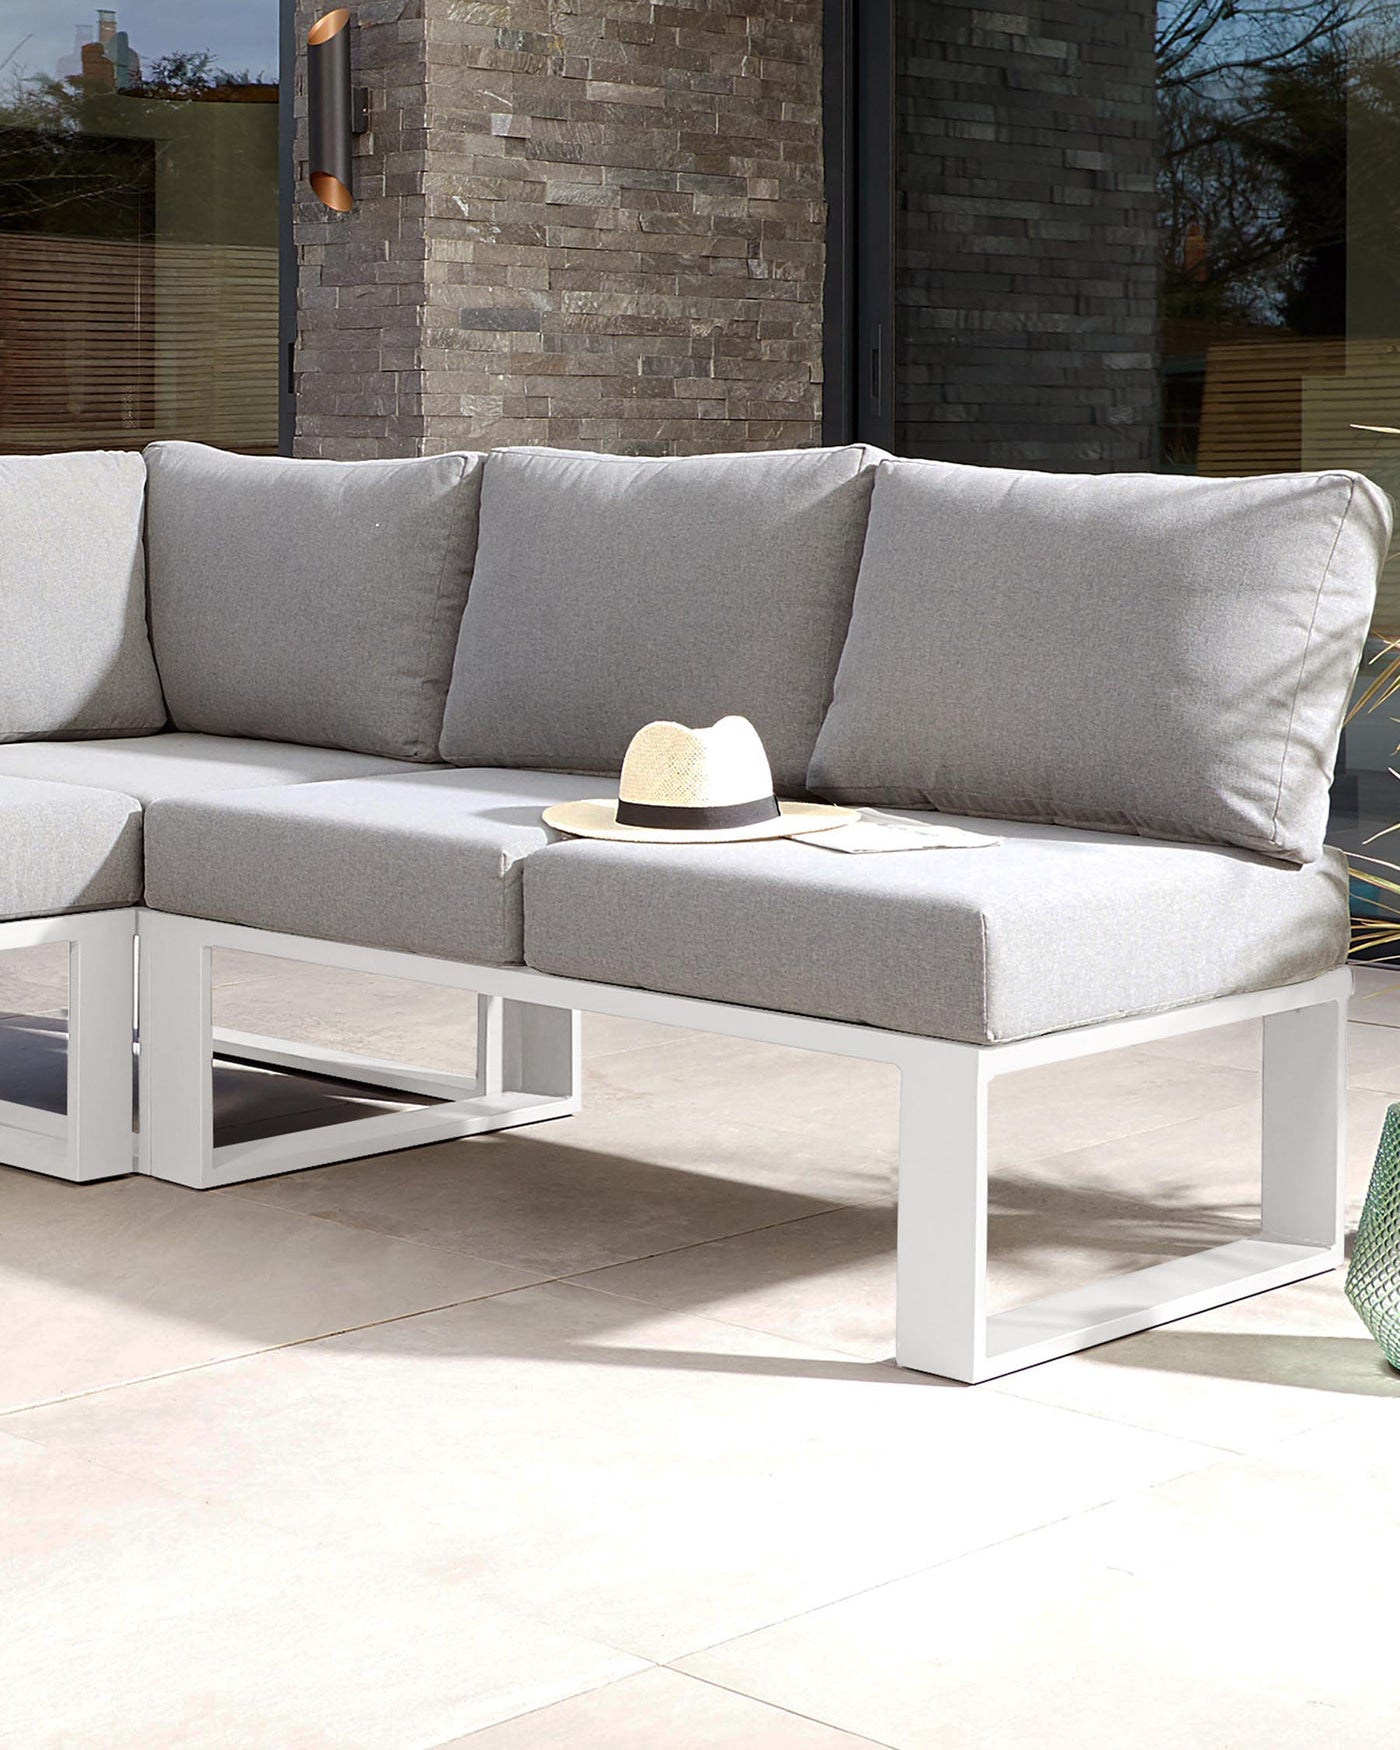 Modern outdoor sectional sofa with light grey cushions on a white minimalist frame, accompanied by a white square side table.